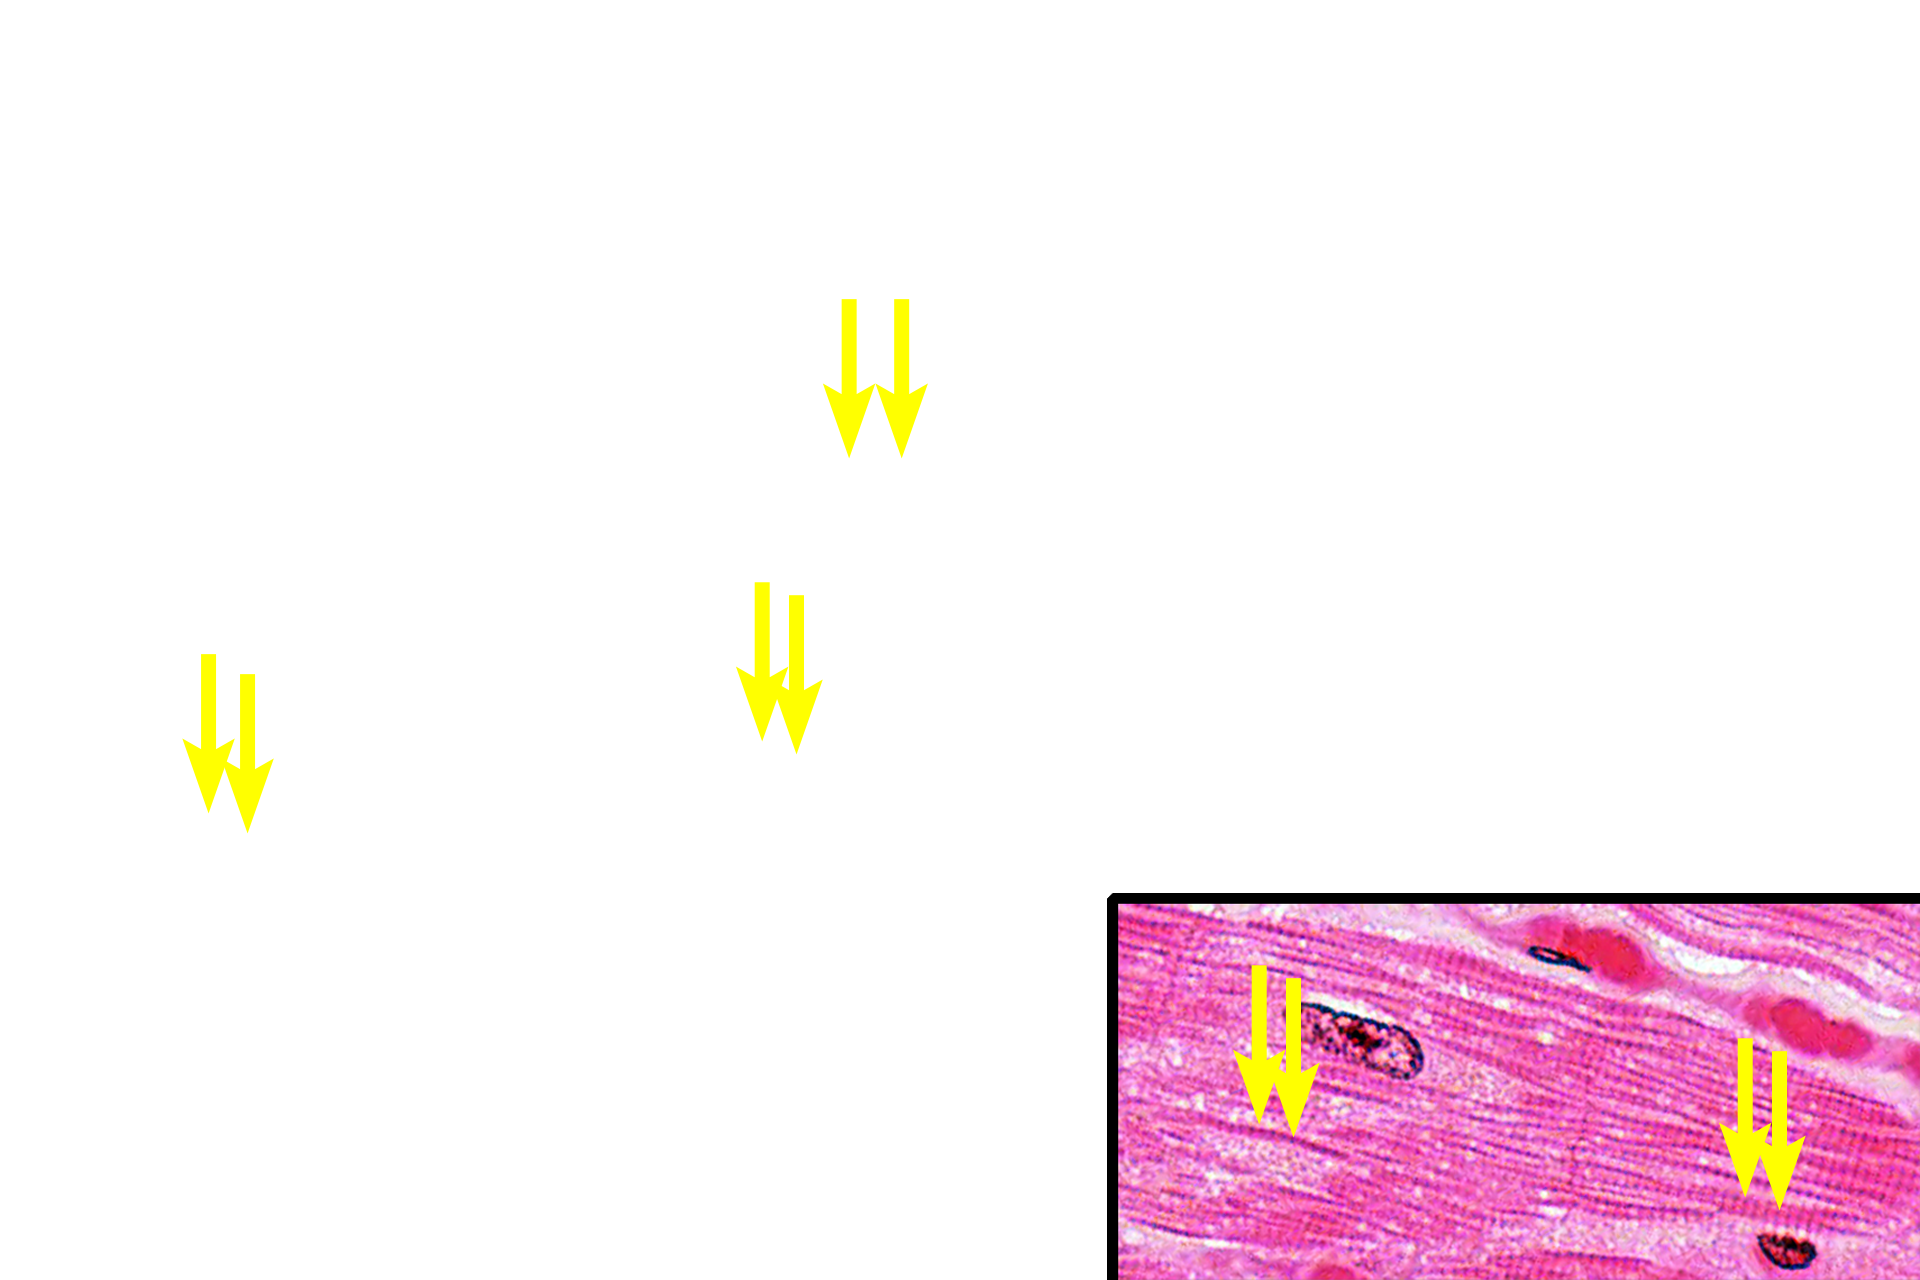  - Striations <p>Cardiac muscle fibers have fewer myofibrils compared with skeletal muscle fibers and thus their spacing allows them to be seen individually. The striations are evident along the length of each myofibril. Inset, 1000x</p>
